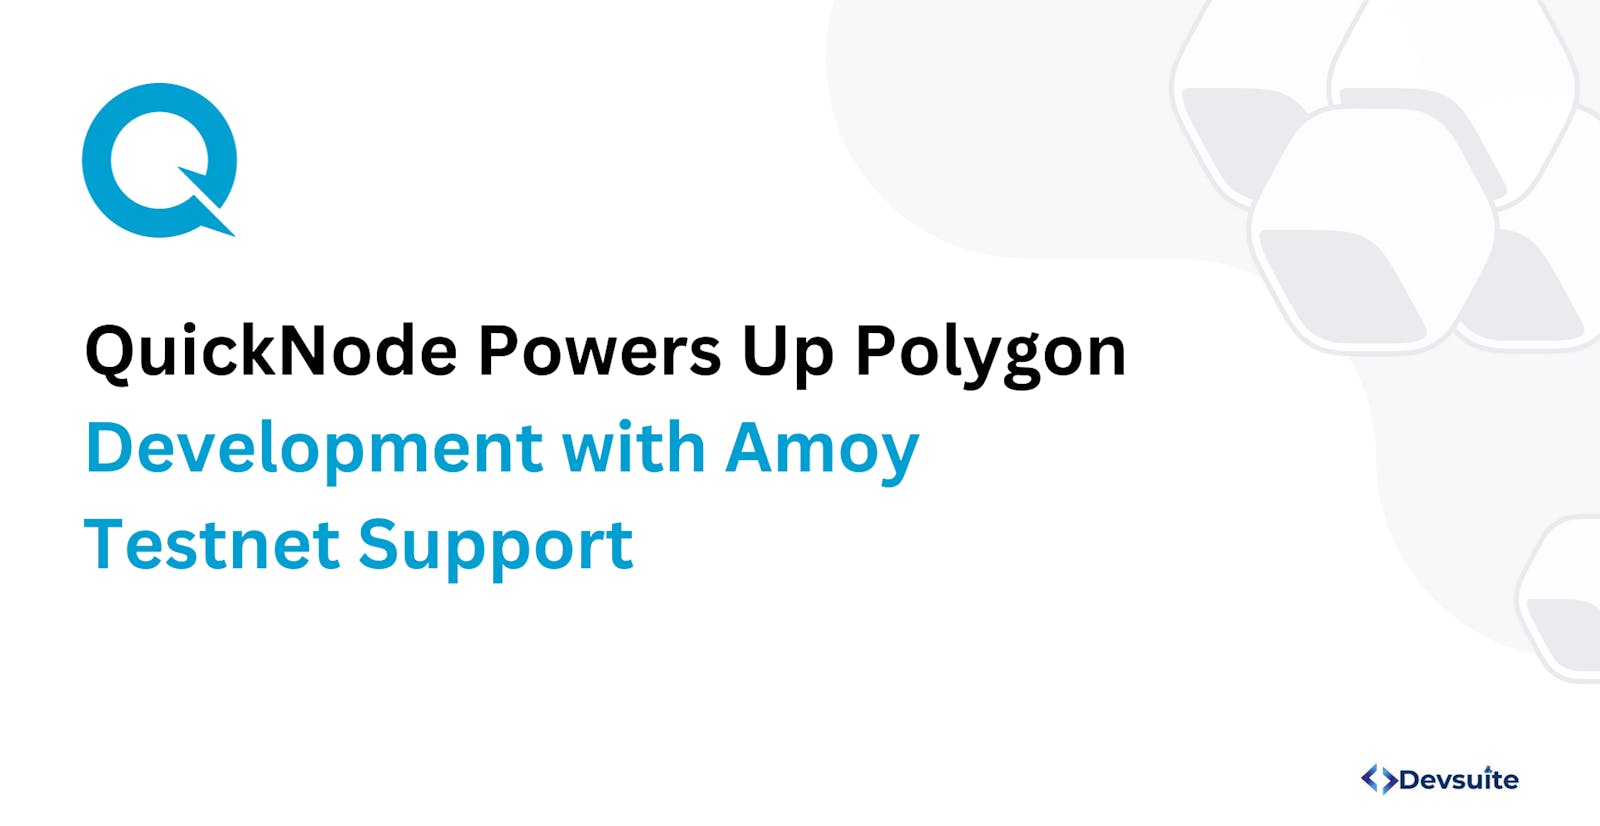 QuickNode Powers Up Polygon Development with Amoy Testnet Support